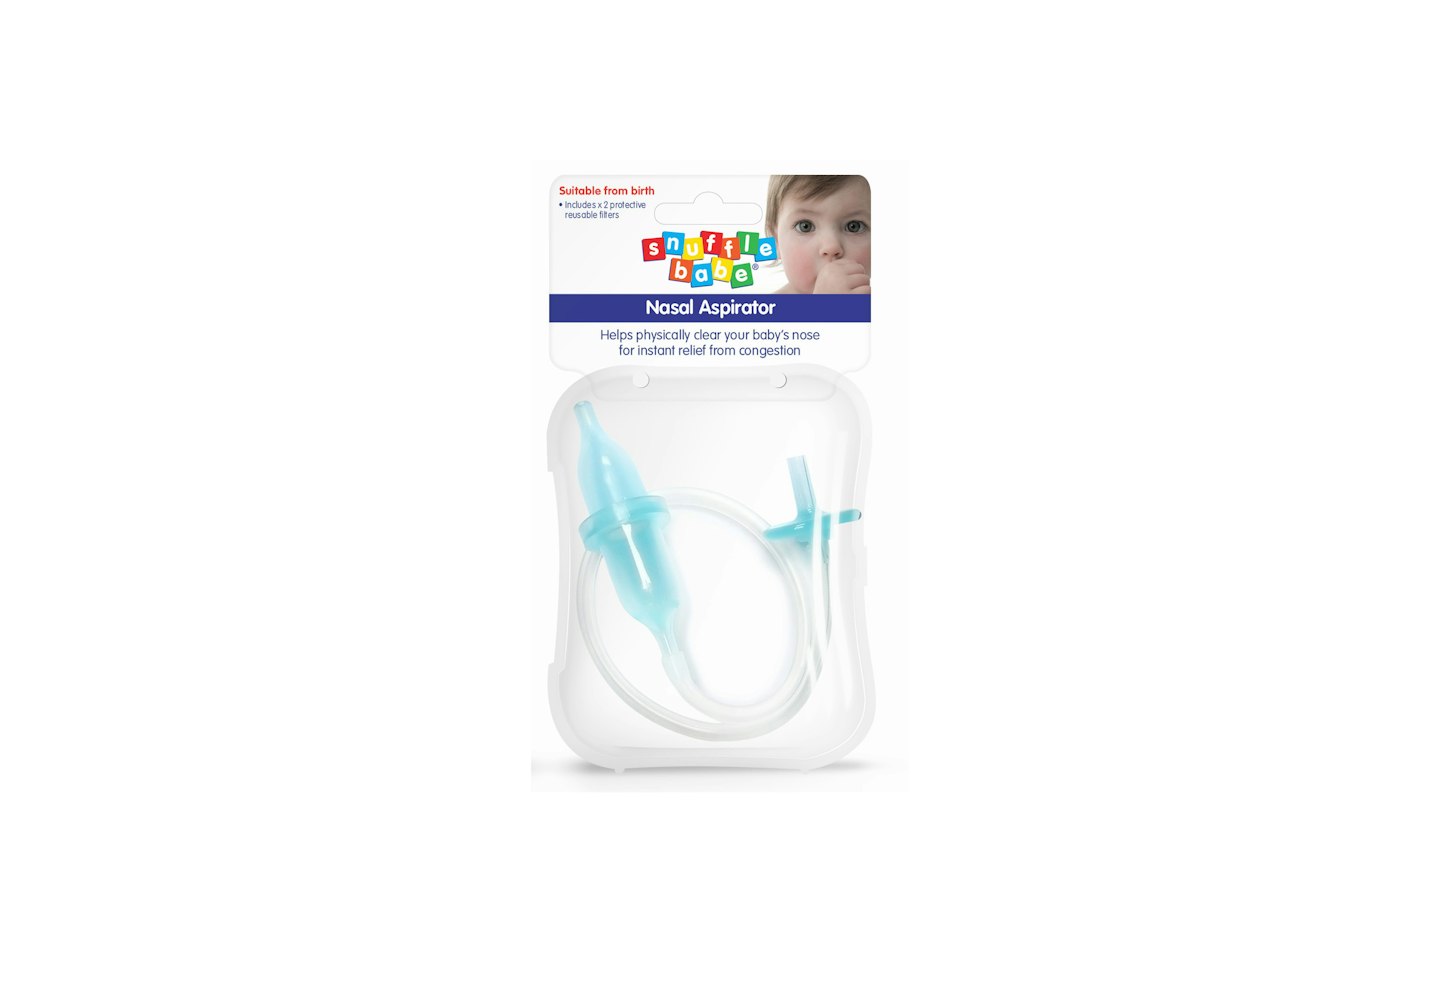 The device works by helping you suck the mucus out of your baby’s nose to ease his congestion. No, don’t worry, you don’t have to eat your baby’s bogies. There’s a clever filter that means you insert the tube into your baby’s nose, and suck, without gett